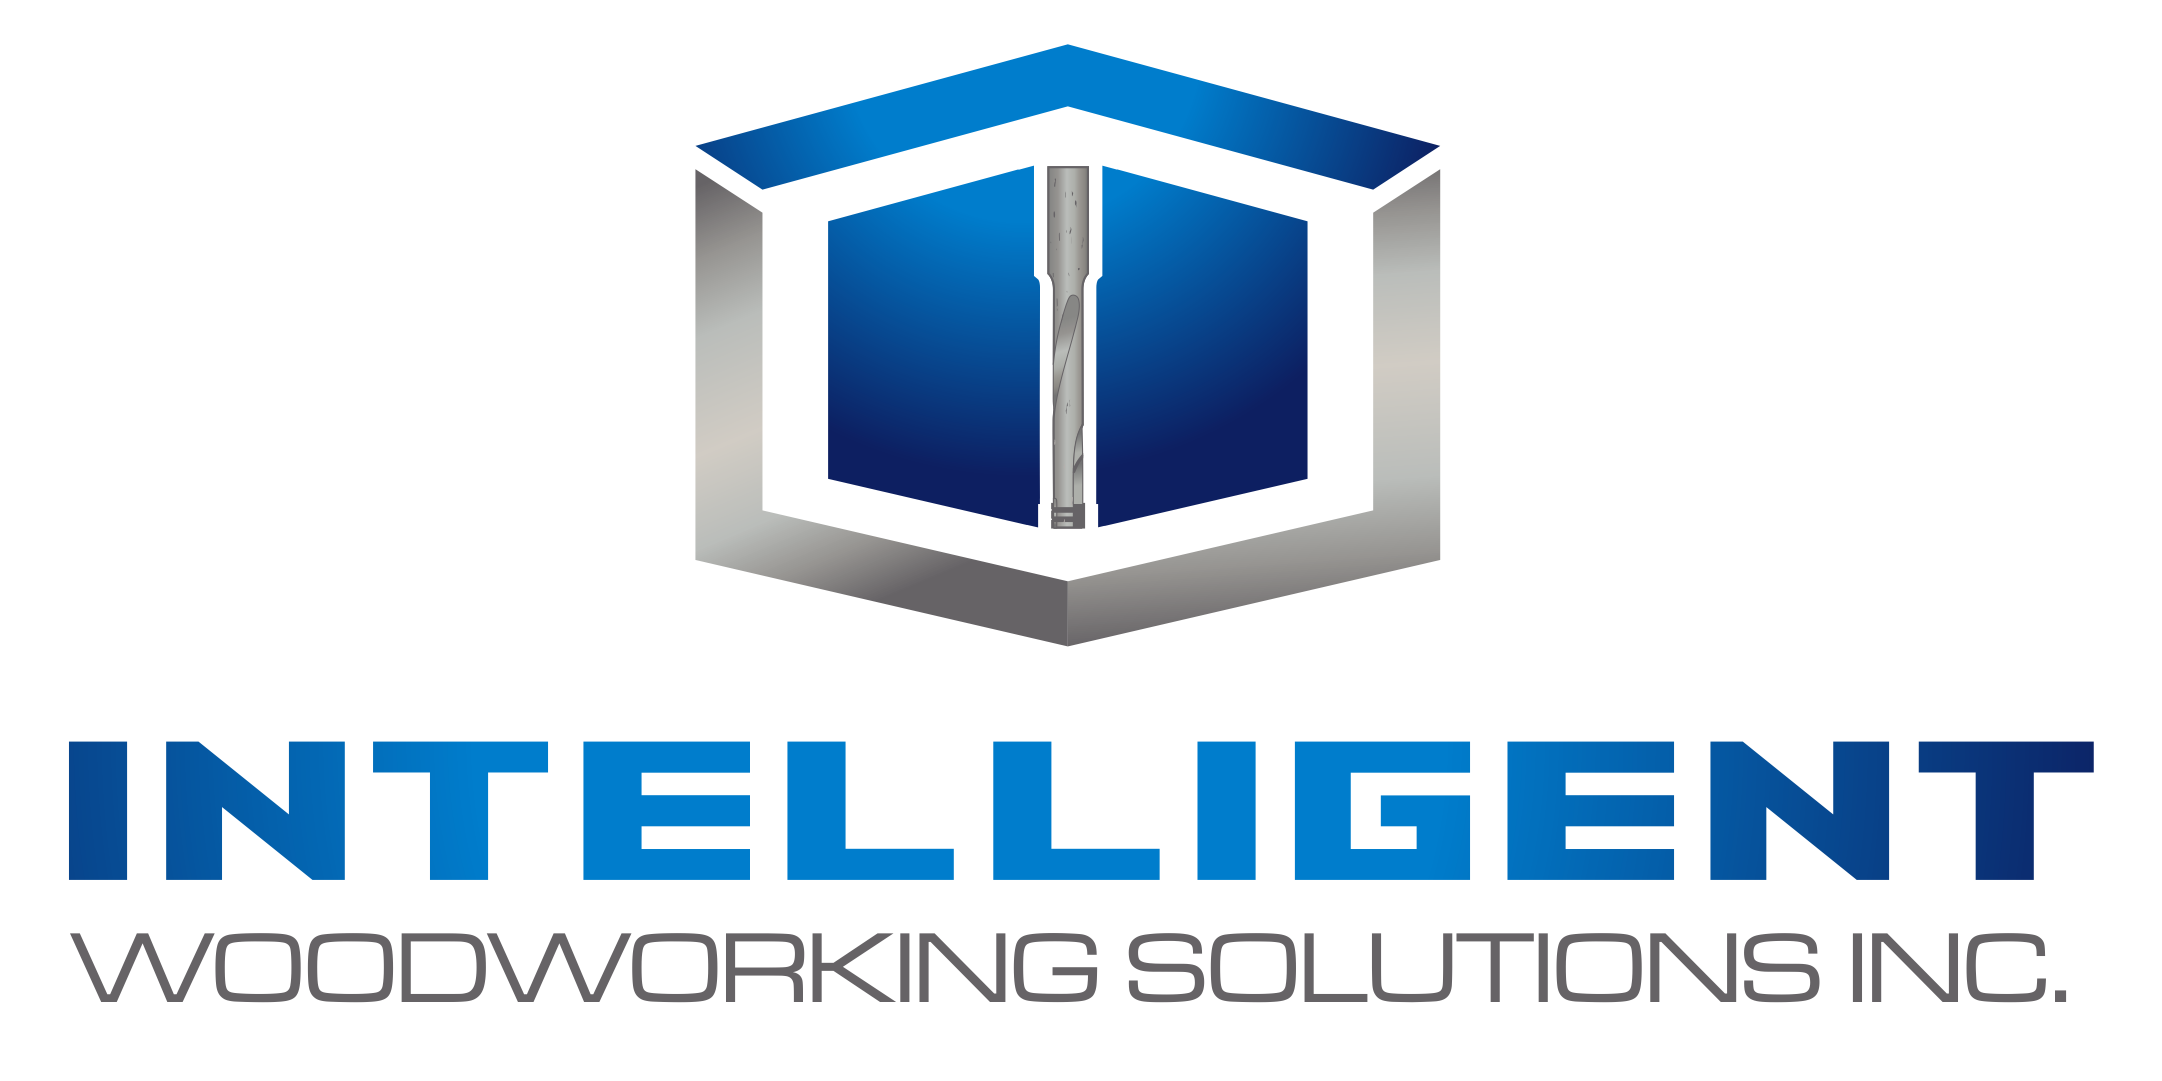 Intelligent Woodworking Solutions, Inc.